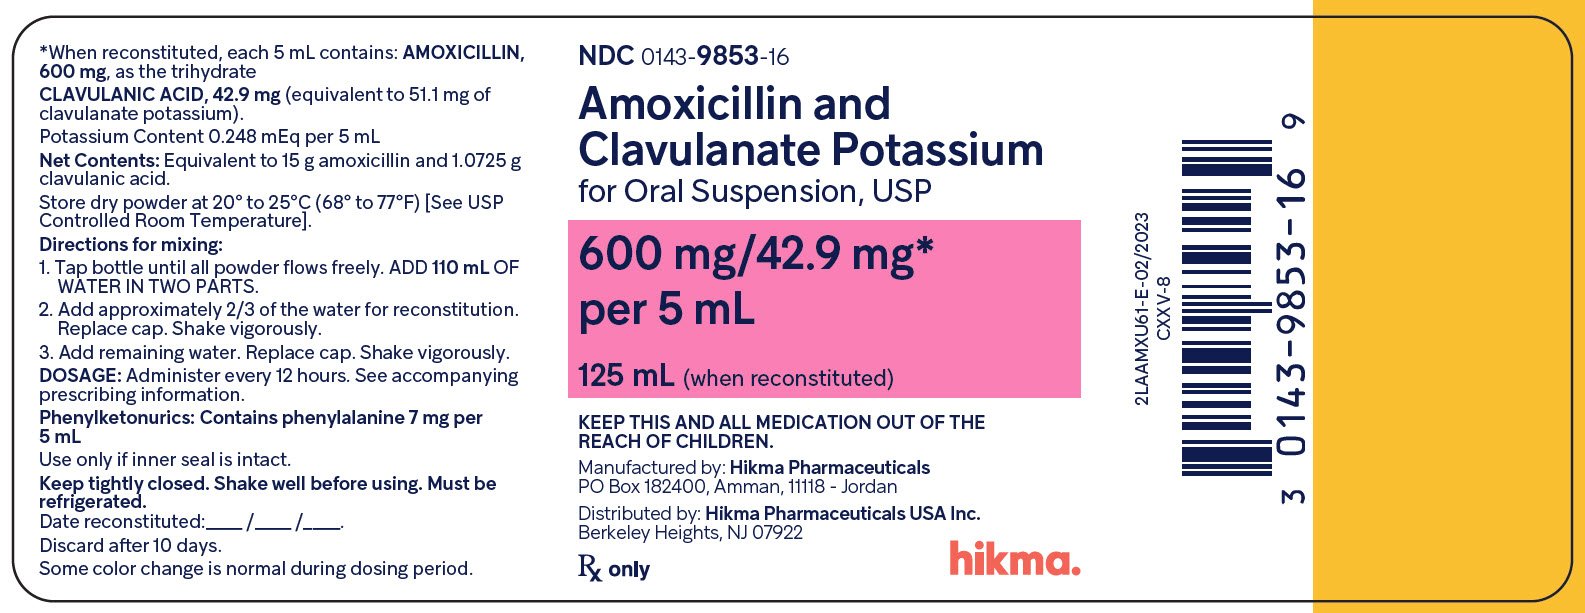 Amoxicillin and Clavulanate Potassium for Oral Suspension USP, 600 mg/42.9 mg per 5 mL (125 mL) bottle label image